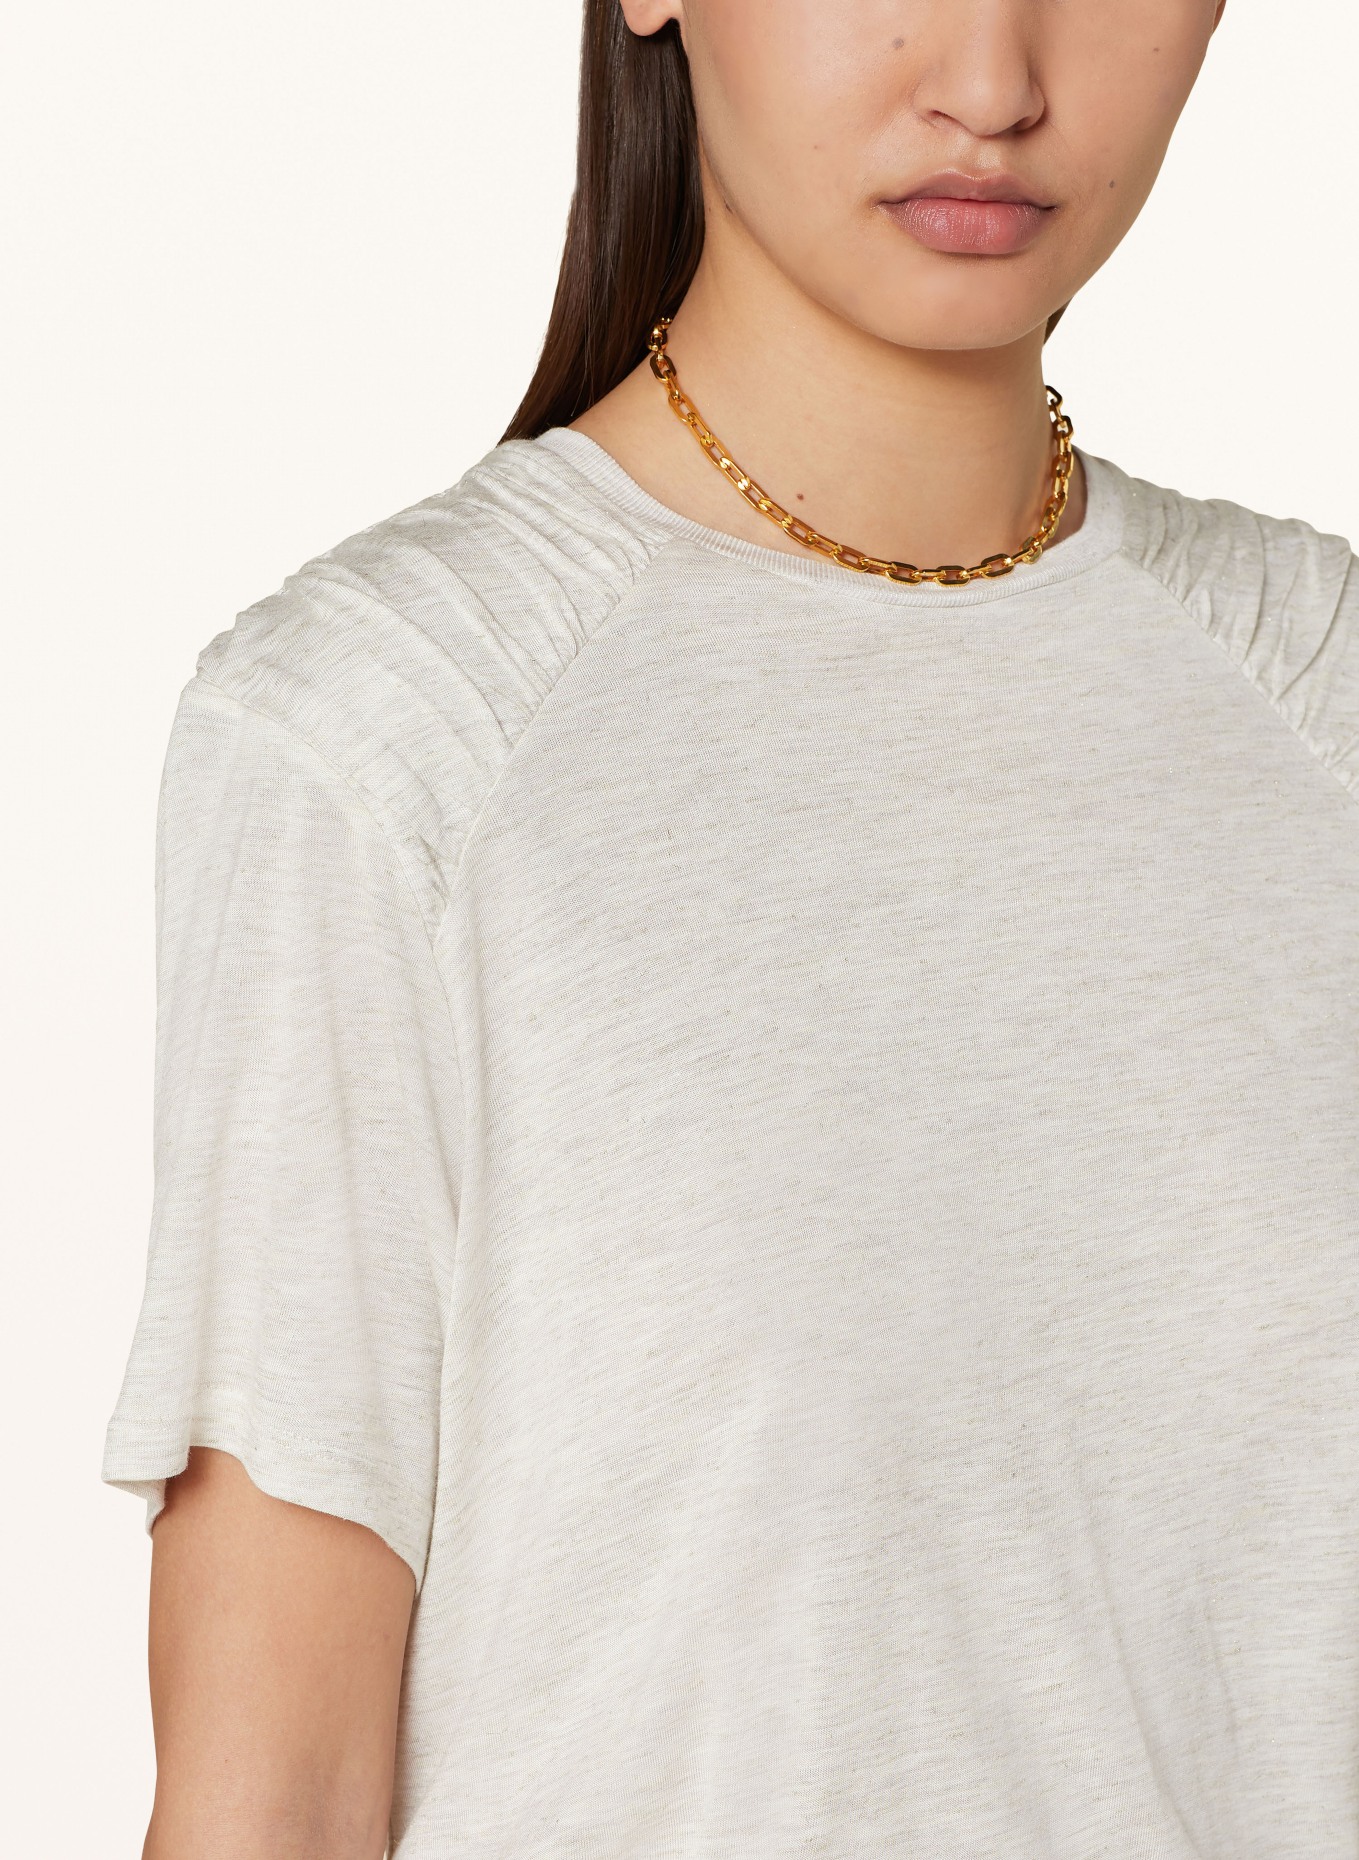 TED BAKER T-shirt DAWNAAA with glitter thread, Color: LIGHT GRAY/ GOLD (Image 4)